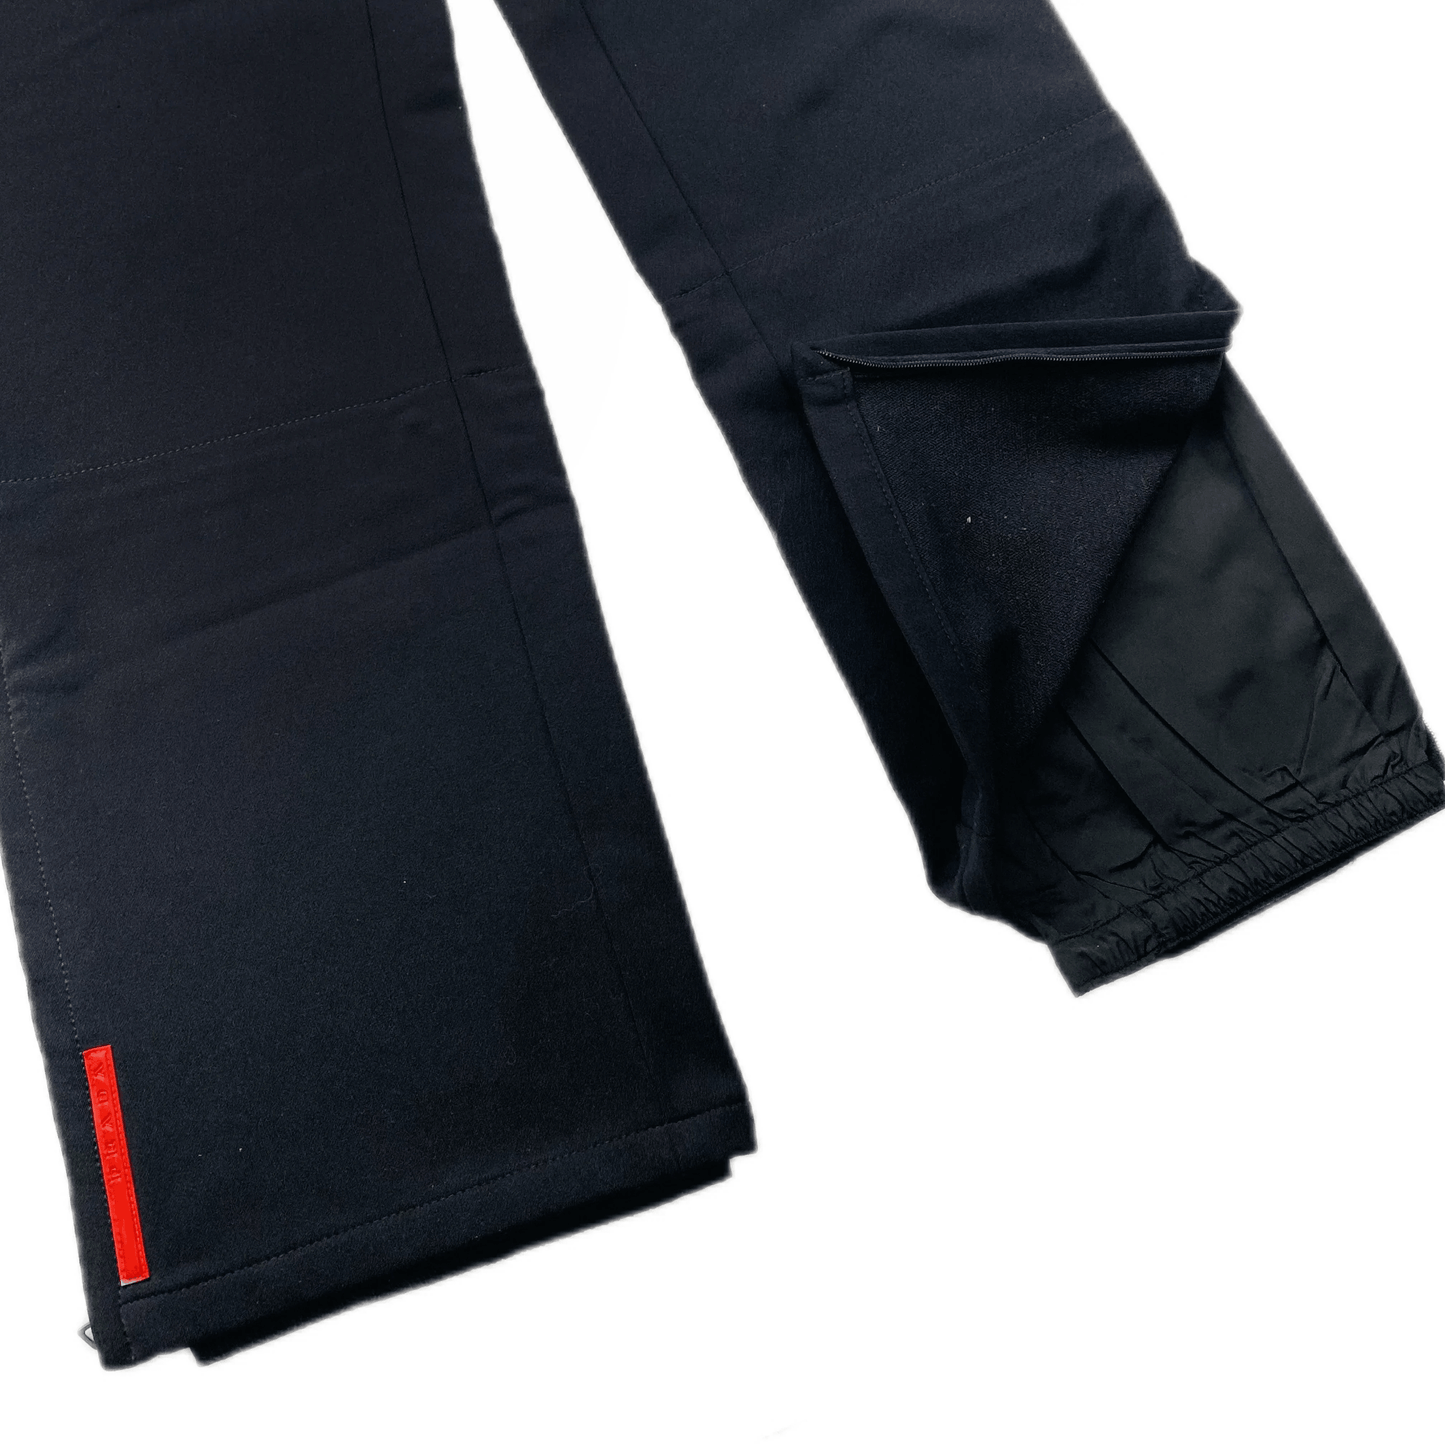 PRADA 1999 GORETEX REMOVABLE ANKLE WARMERS TROUSERS - Known Source